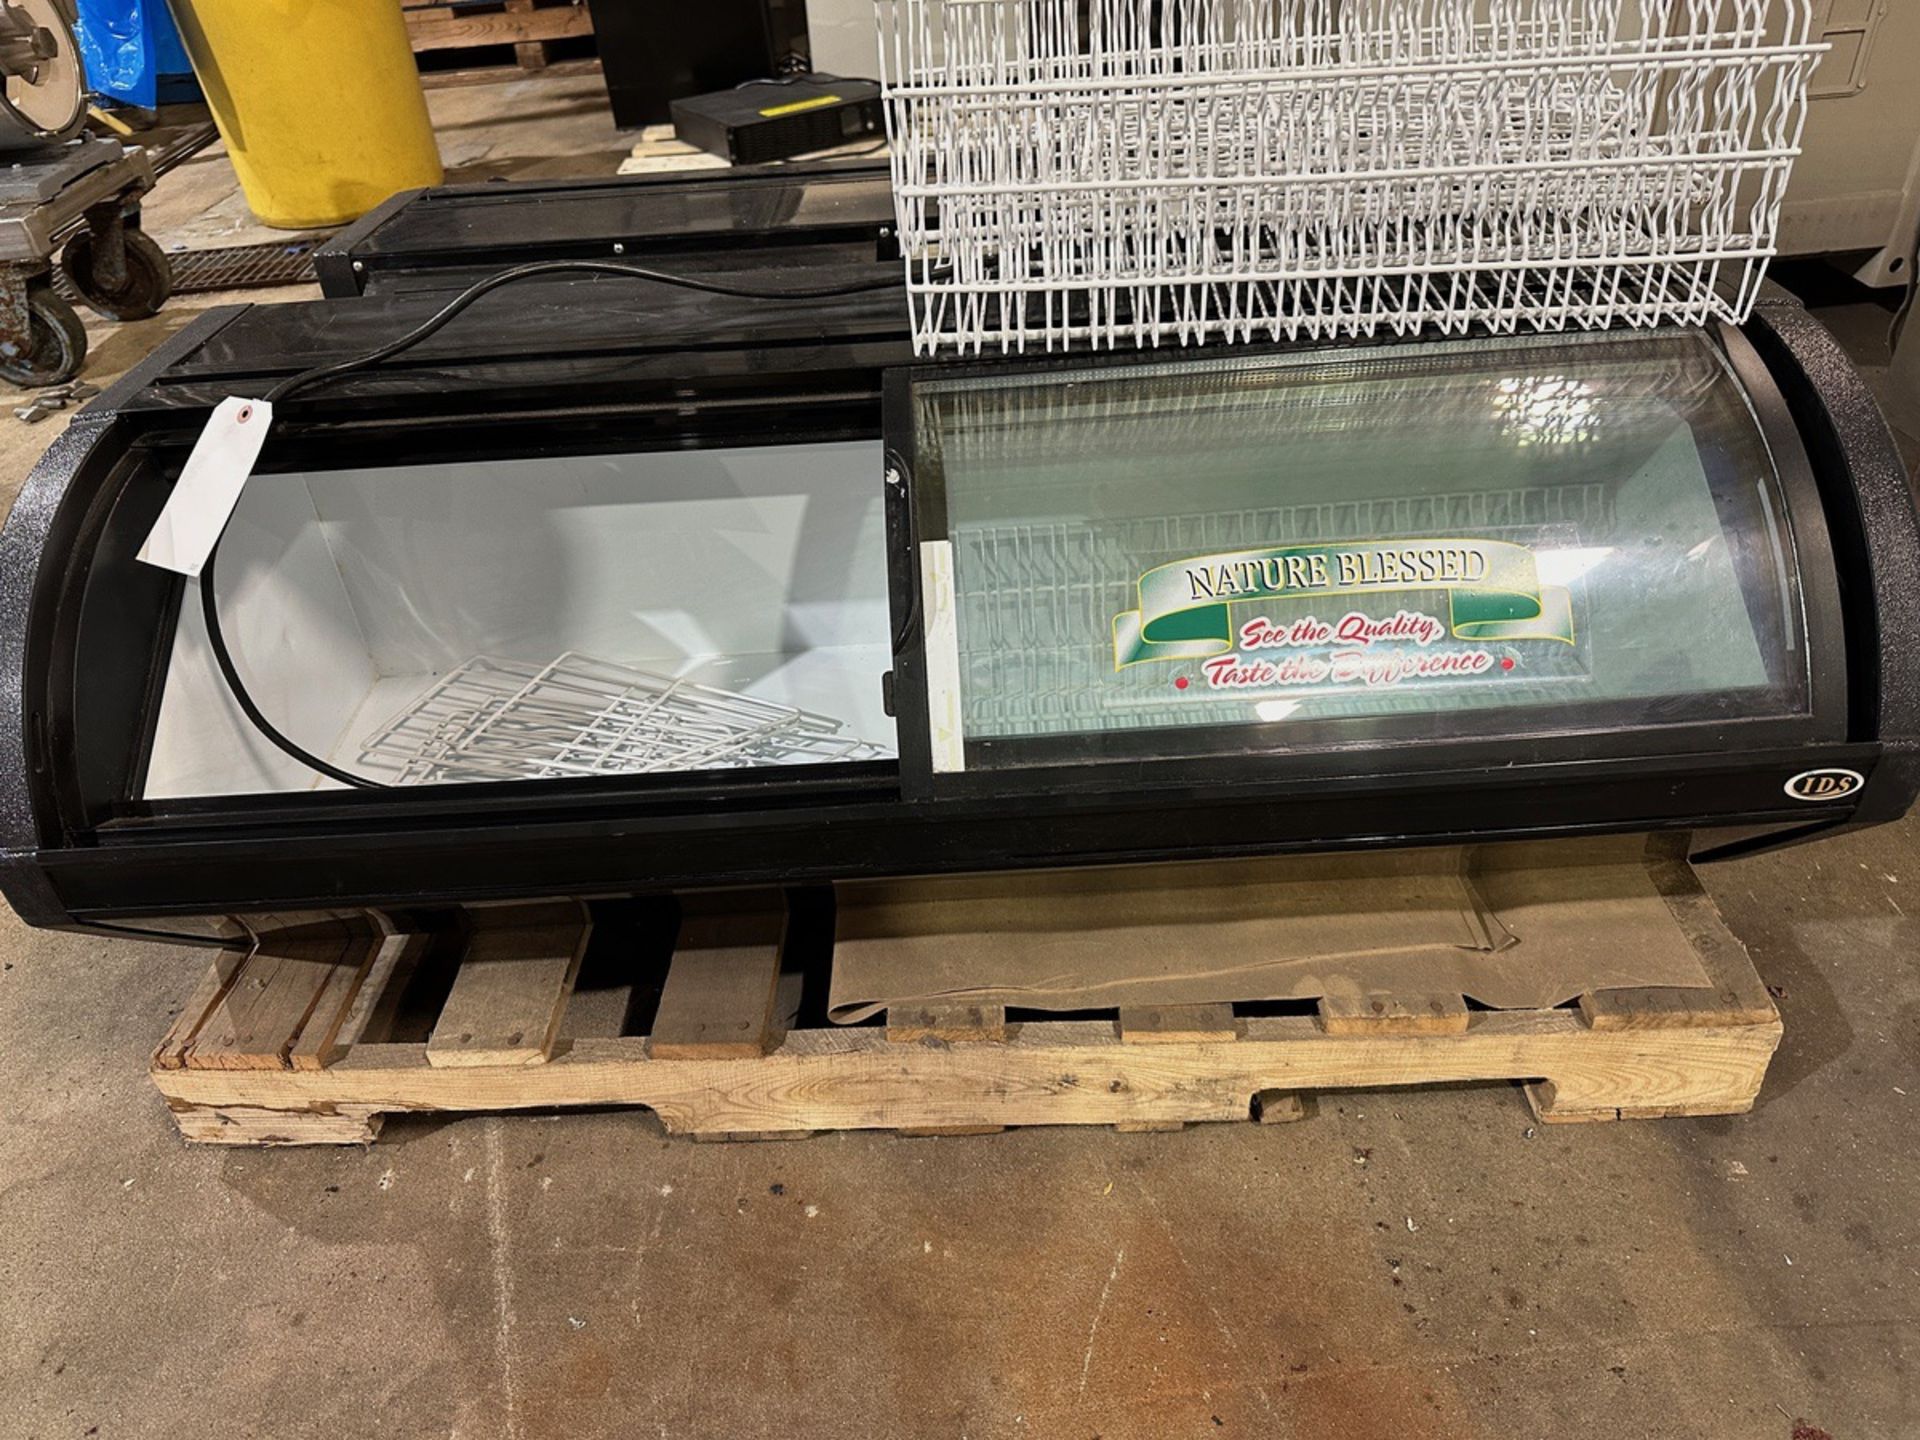 Lot of (2) IDS Ice Cream Display Freezers - Model SD147 | Rig Fee $100 - Image 2 of 5